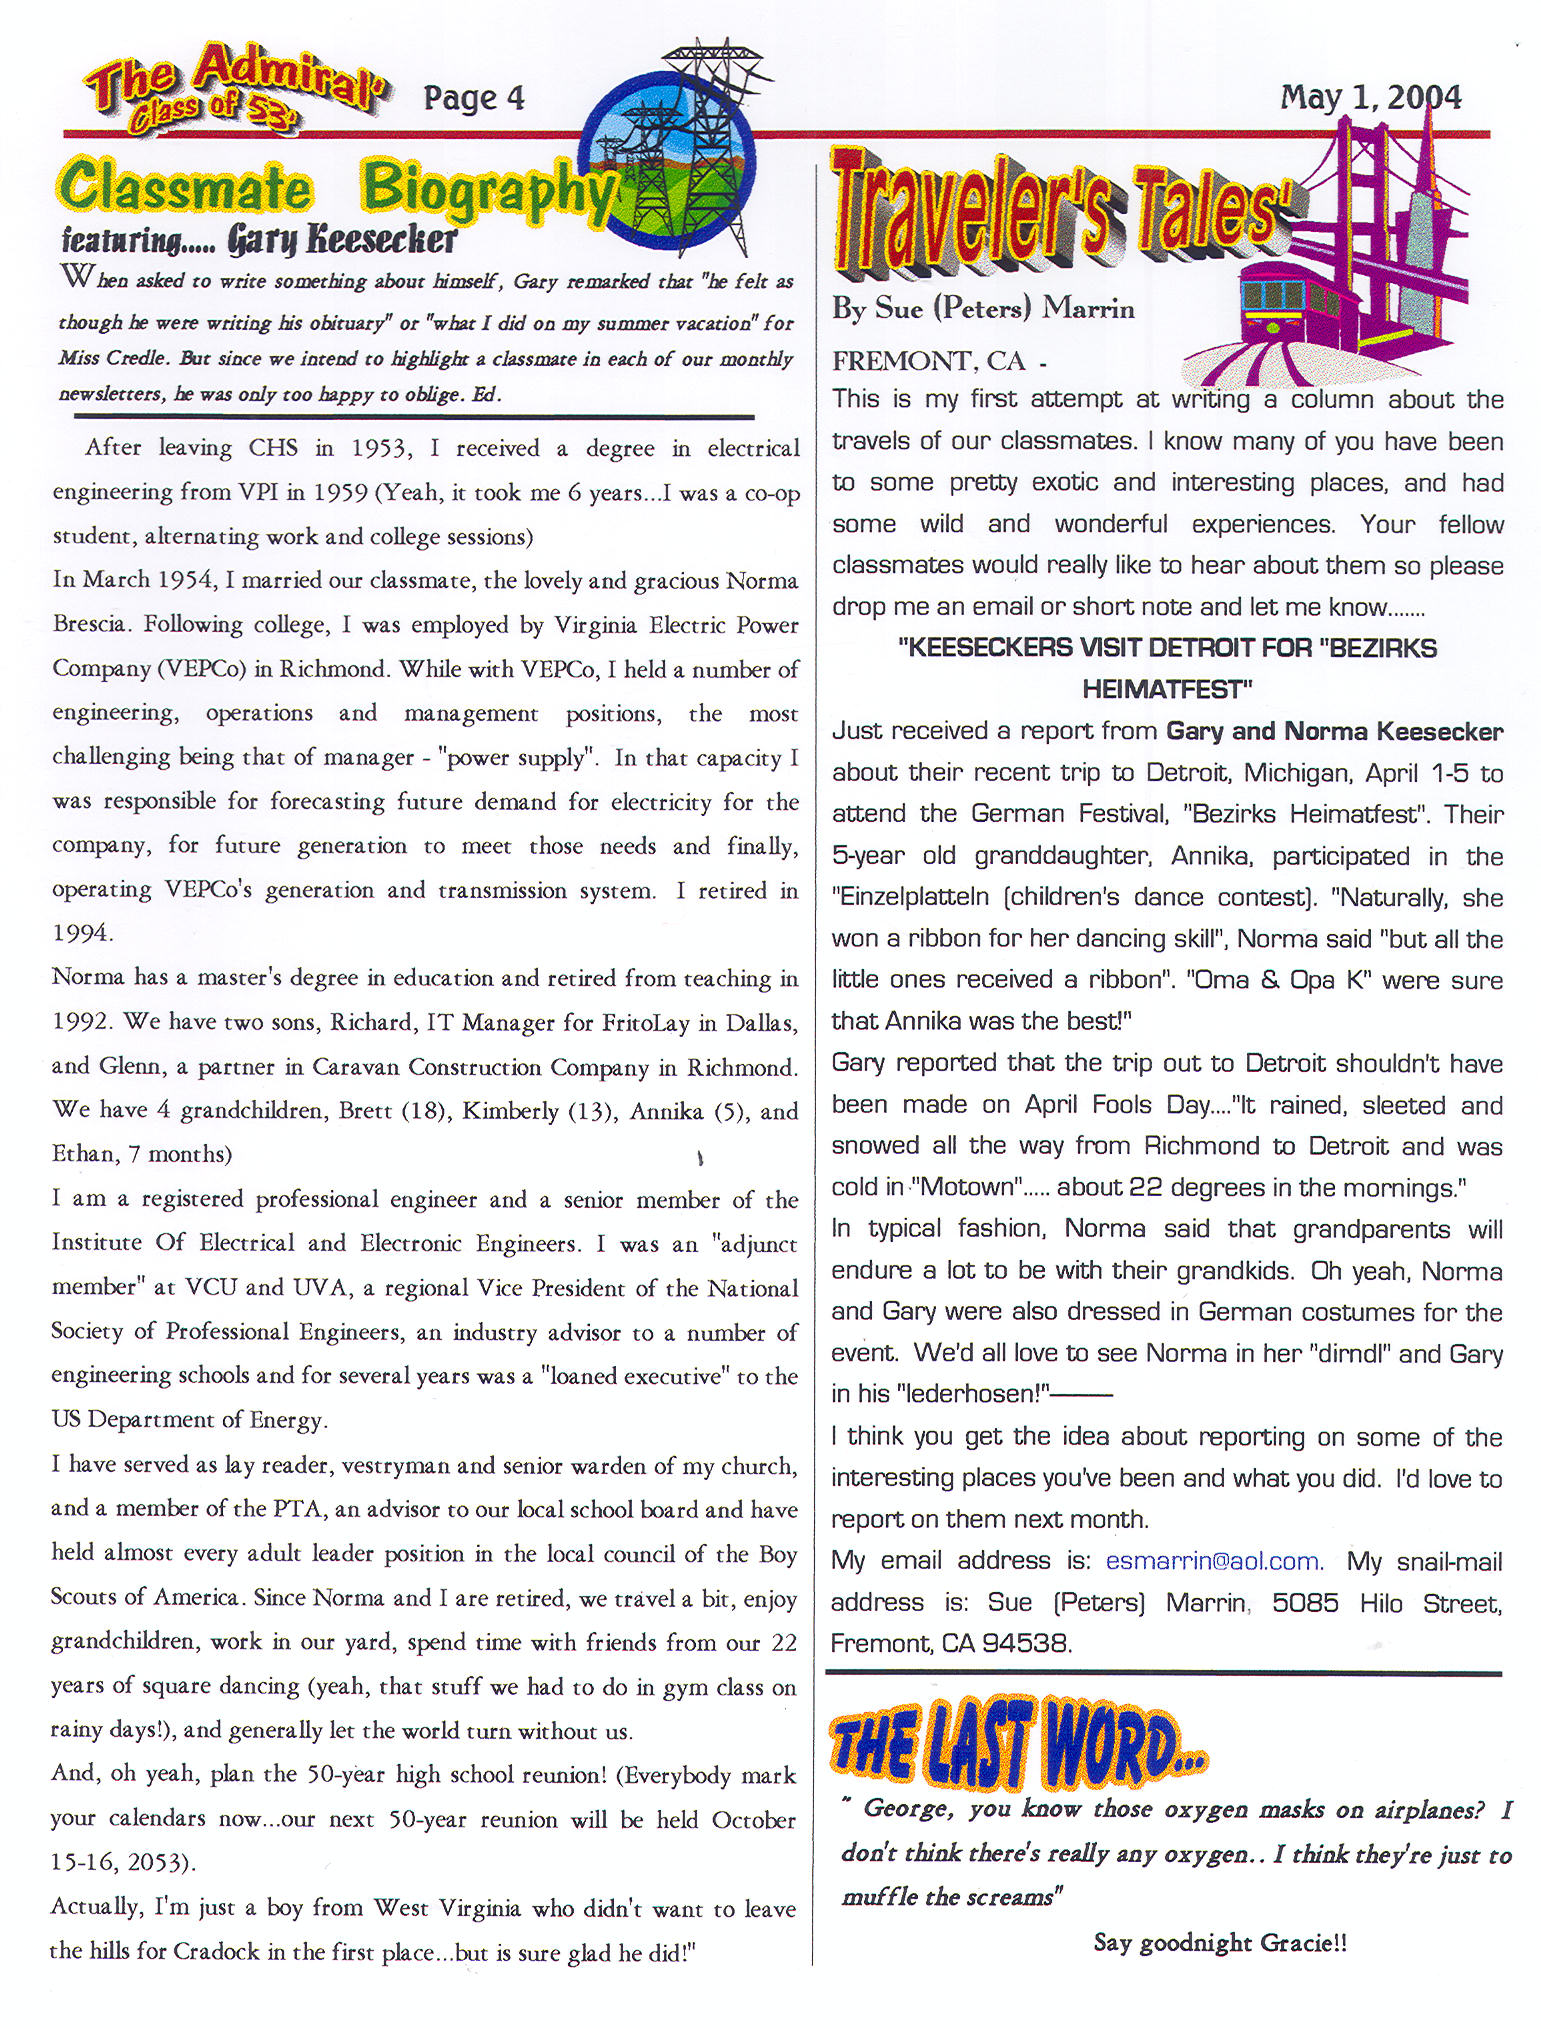 The Admiral - May 2004 - pg. 4